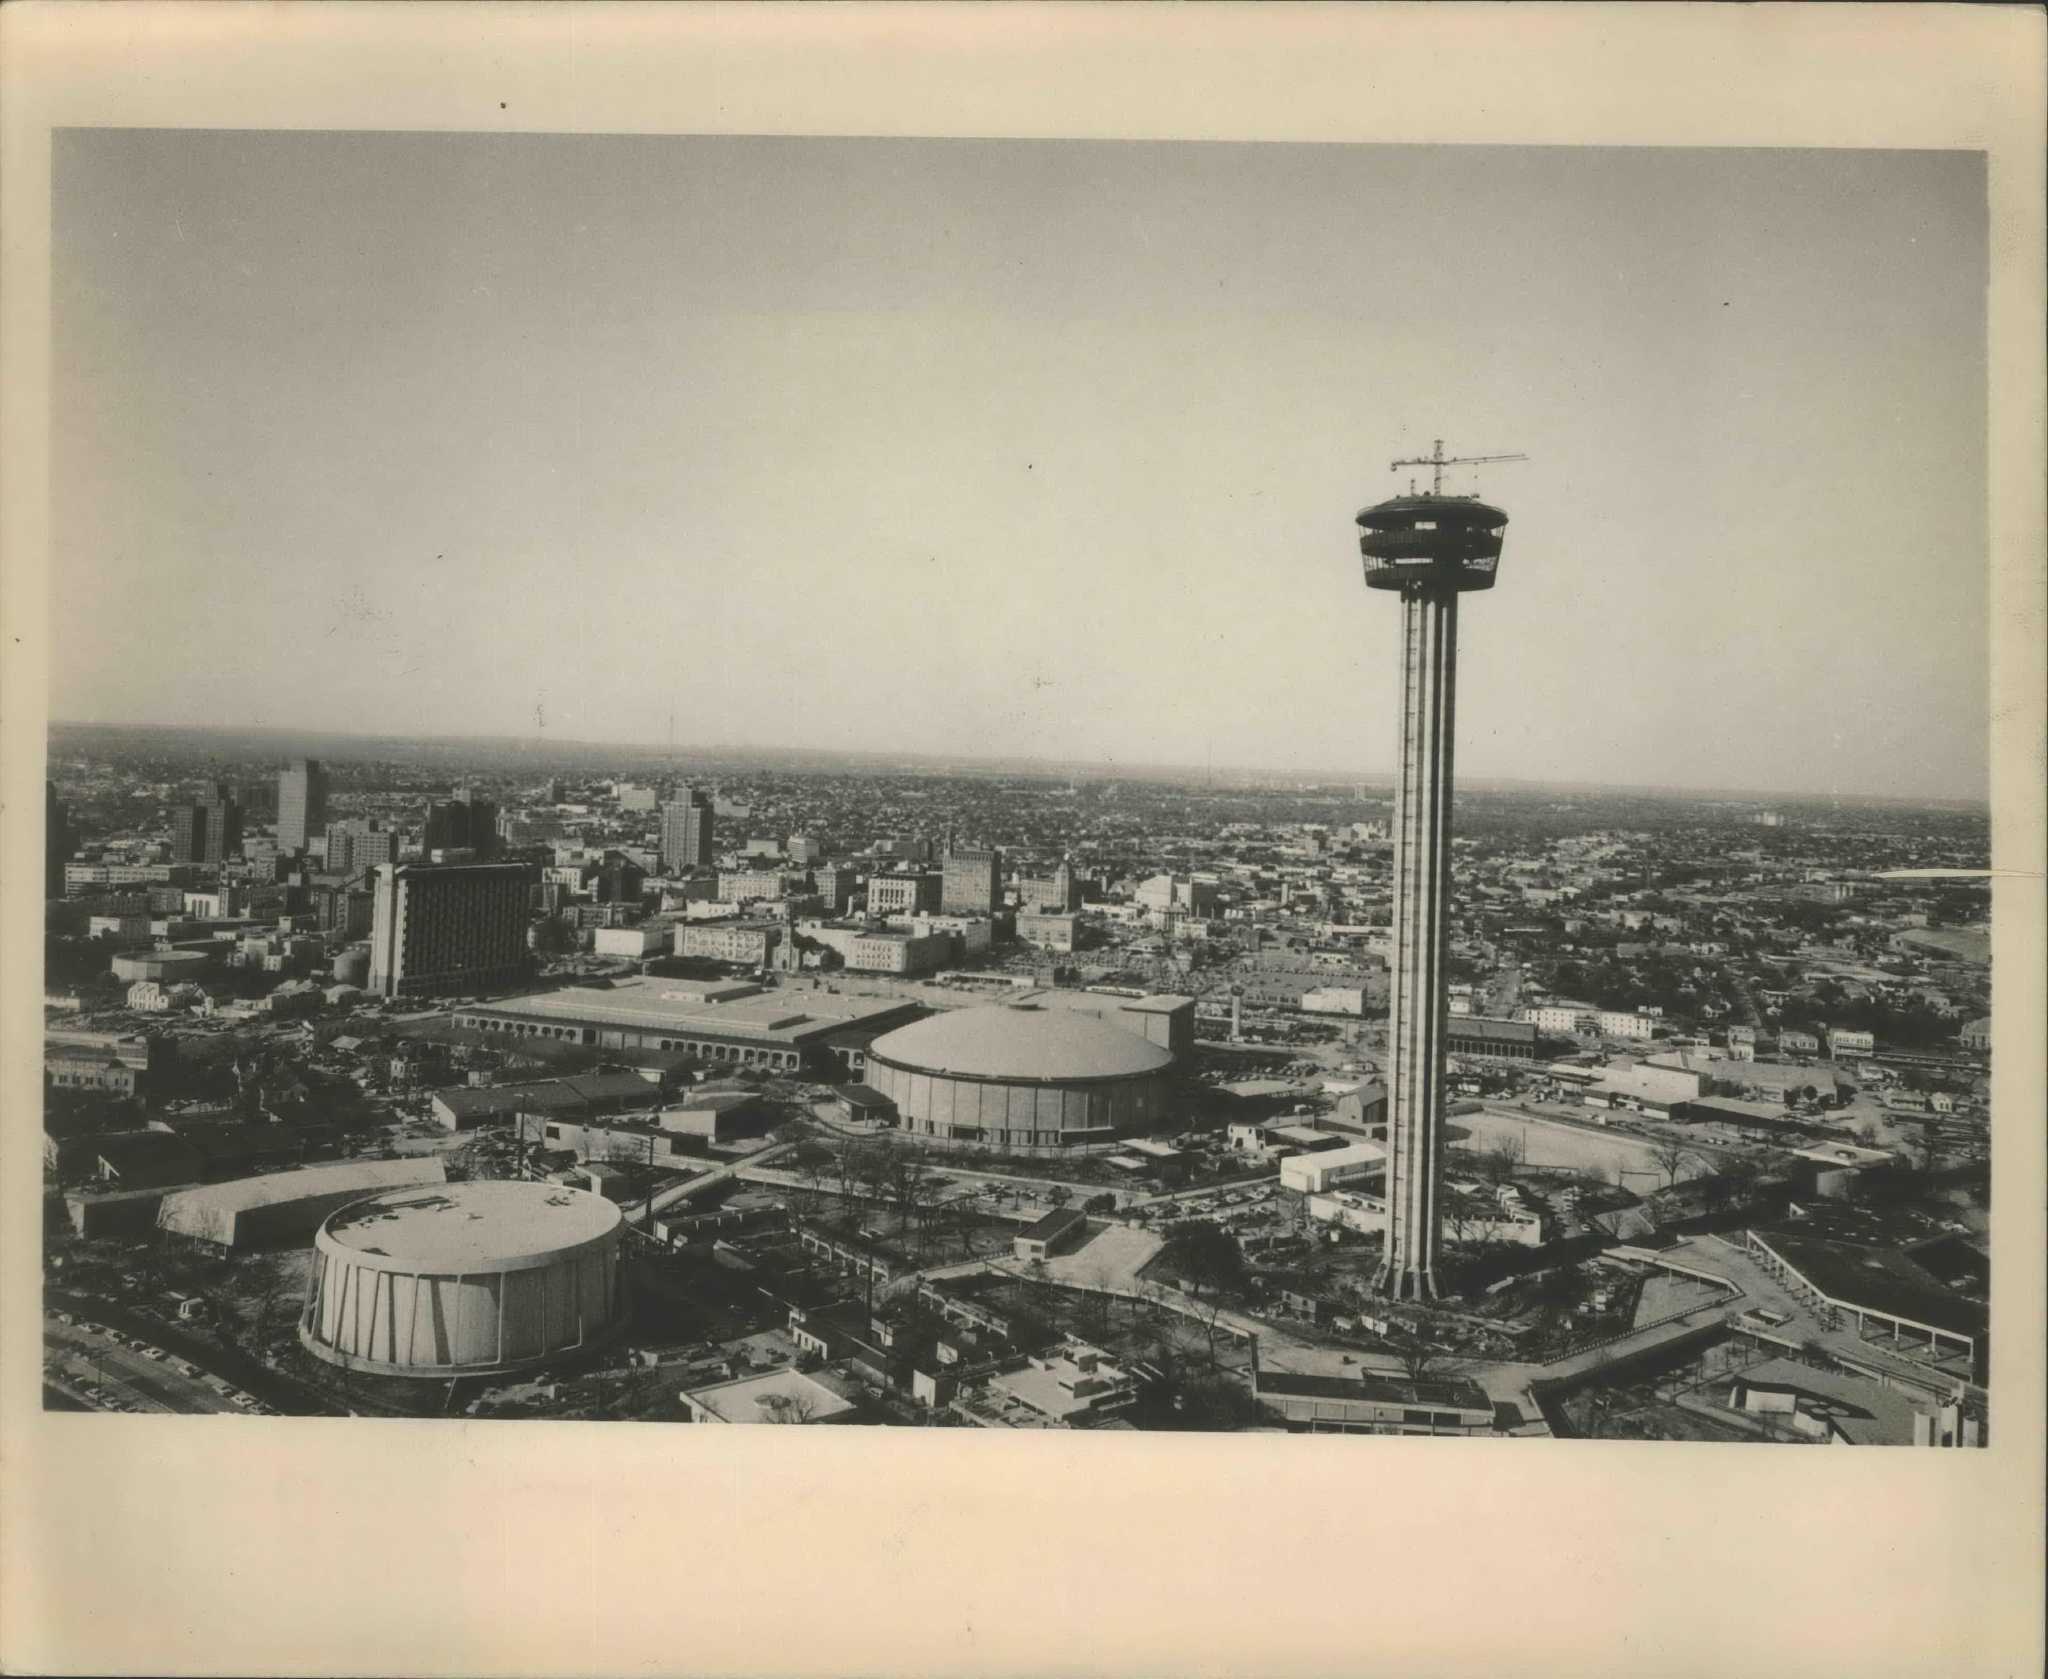 View of HemisFair Arena, home of the San Antonio Spurs NBA basketball team,  taken from the nearby Tower of the Americas in San Antonio, Texas